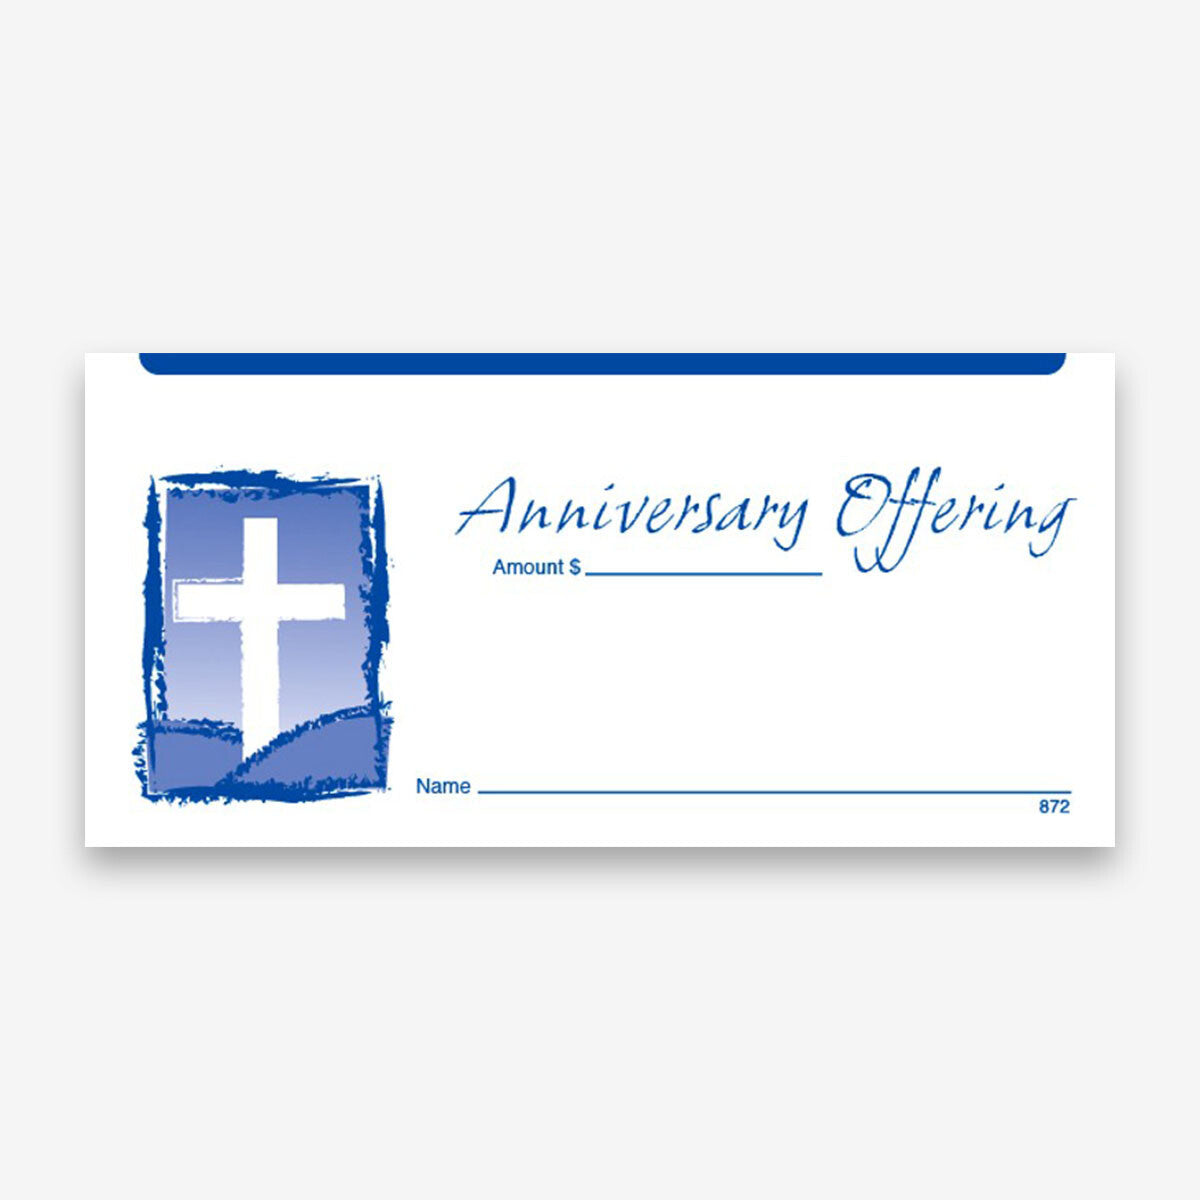 NCS National Church Solutions Anniversary Offering Envelope